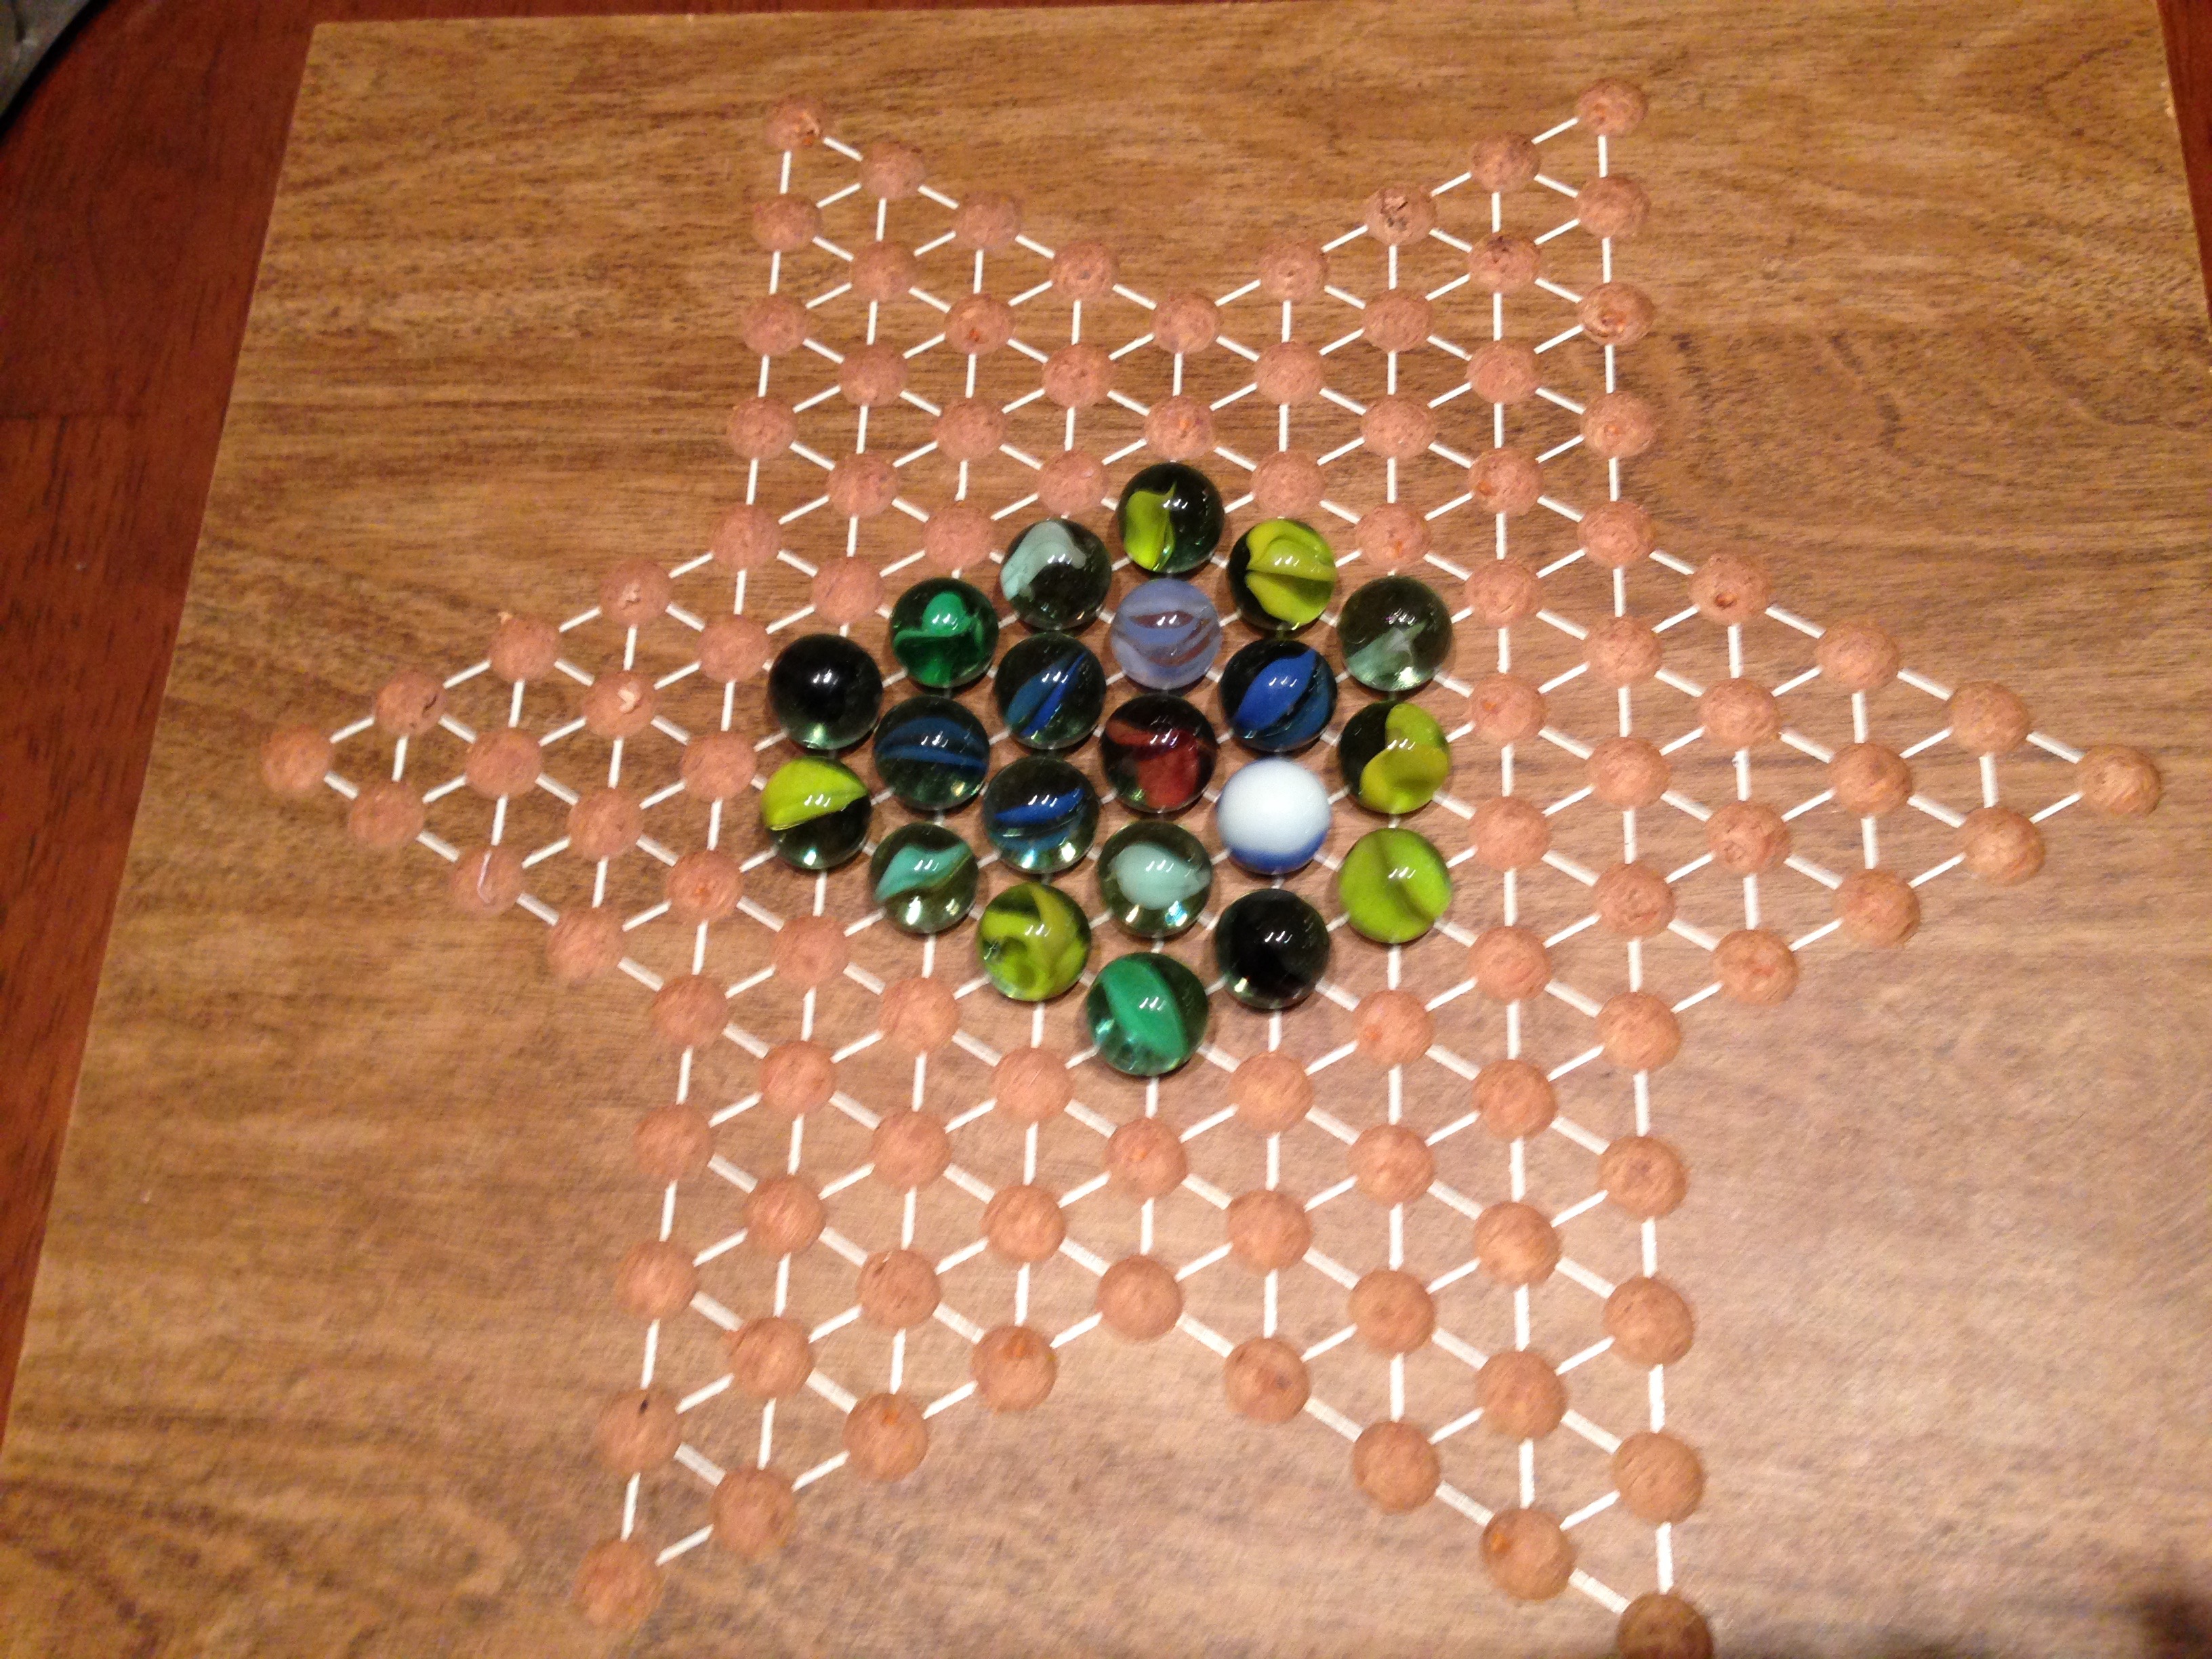 old chinese checkers game